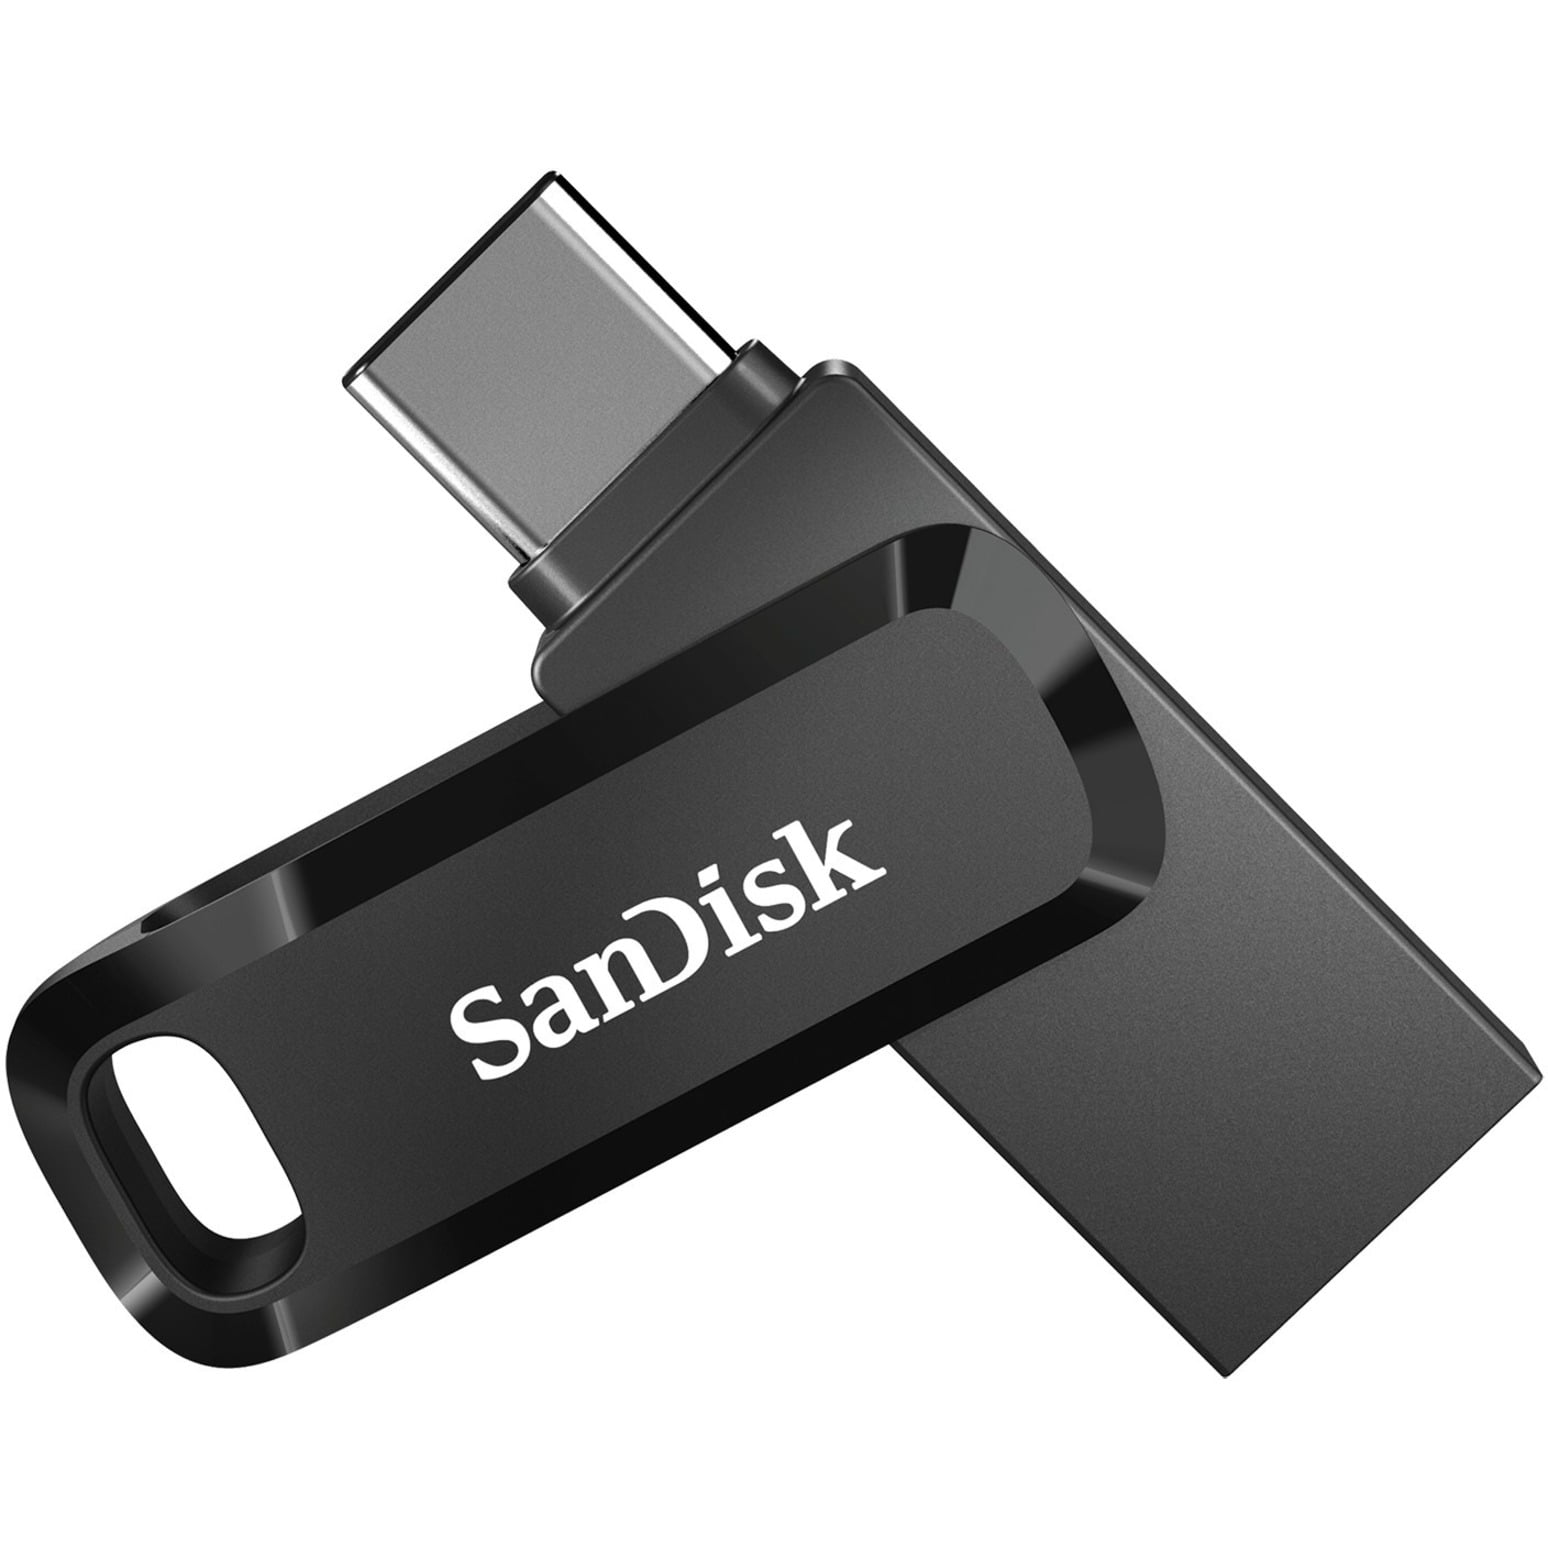 Picture of SanDisk SDDDC3-256G-A46 256GB Plastic Dual USB Type C Drive